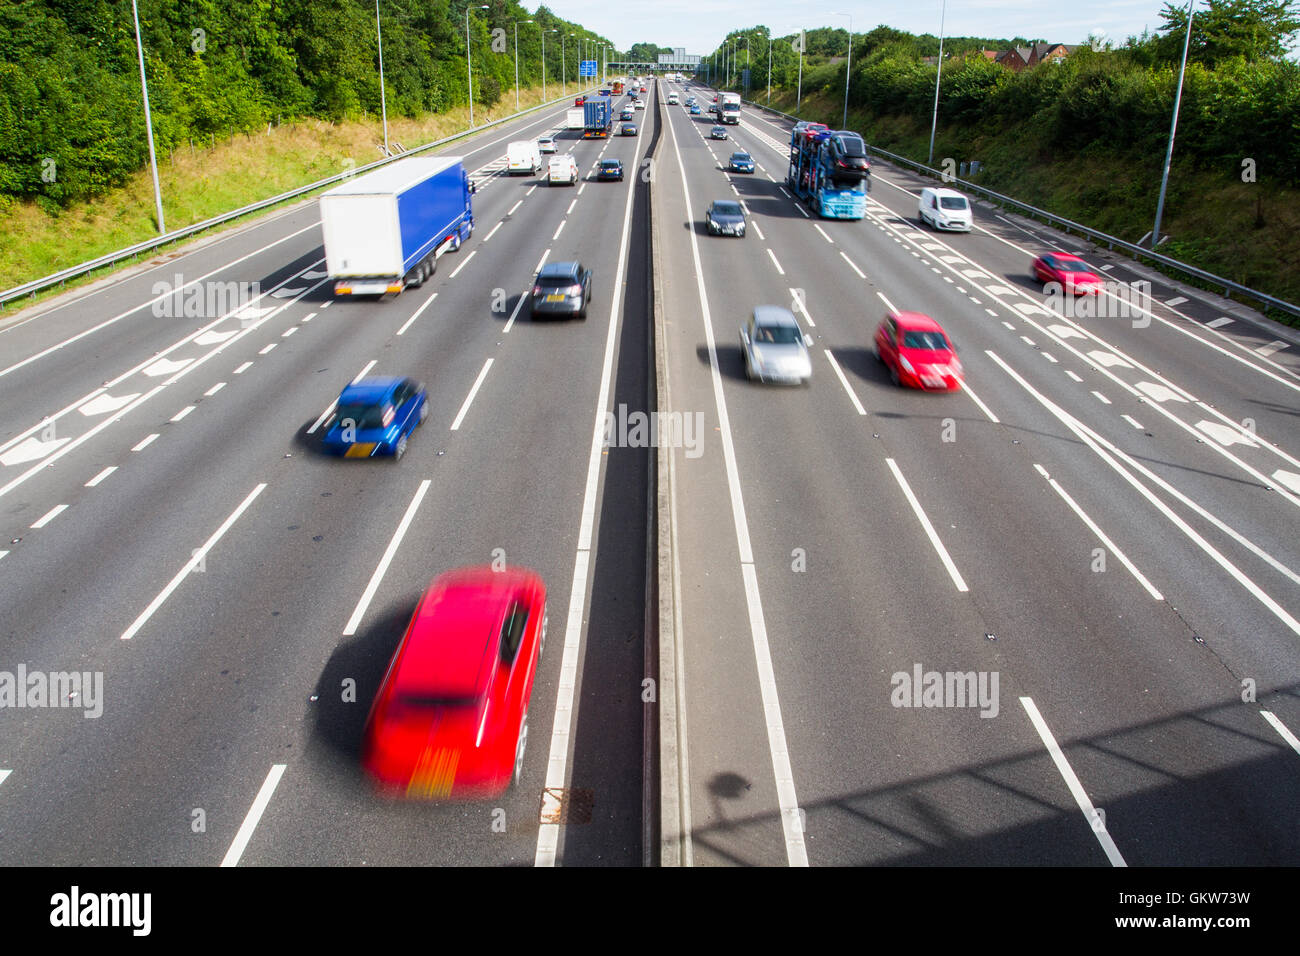 Looking down from a bridge onto the two carriageways of a busy motorway or highway full of fast moving traffic. Stock Photo